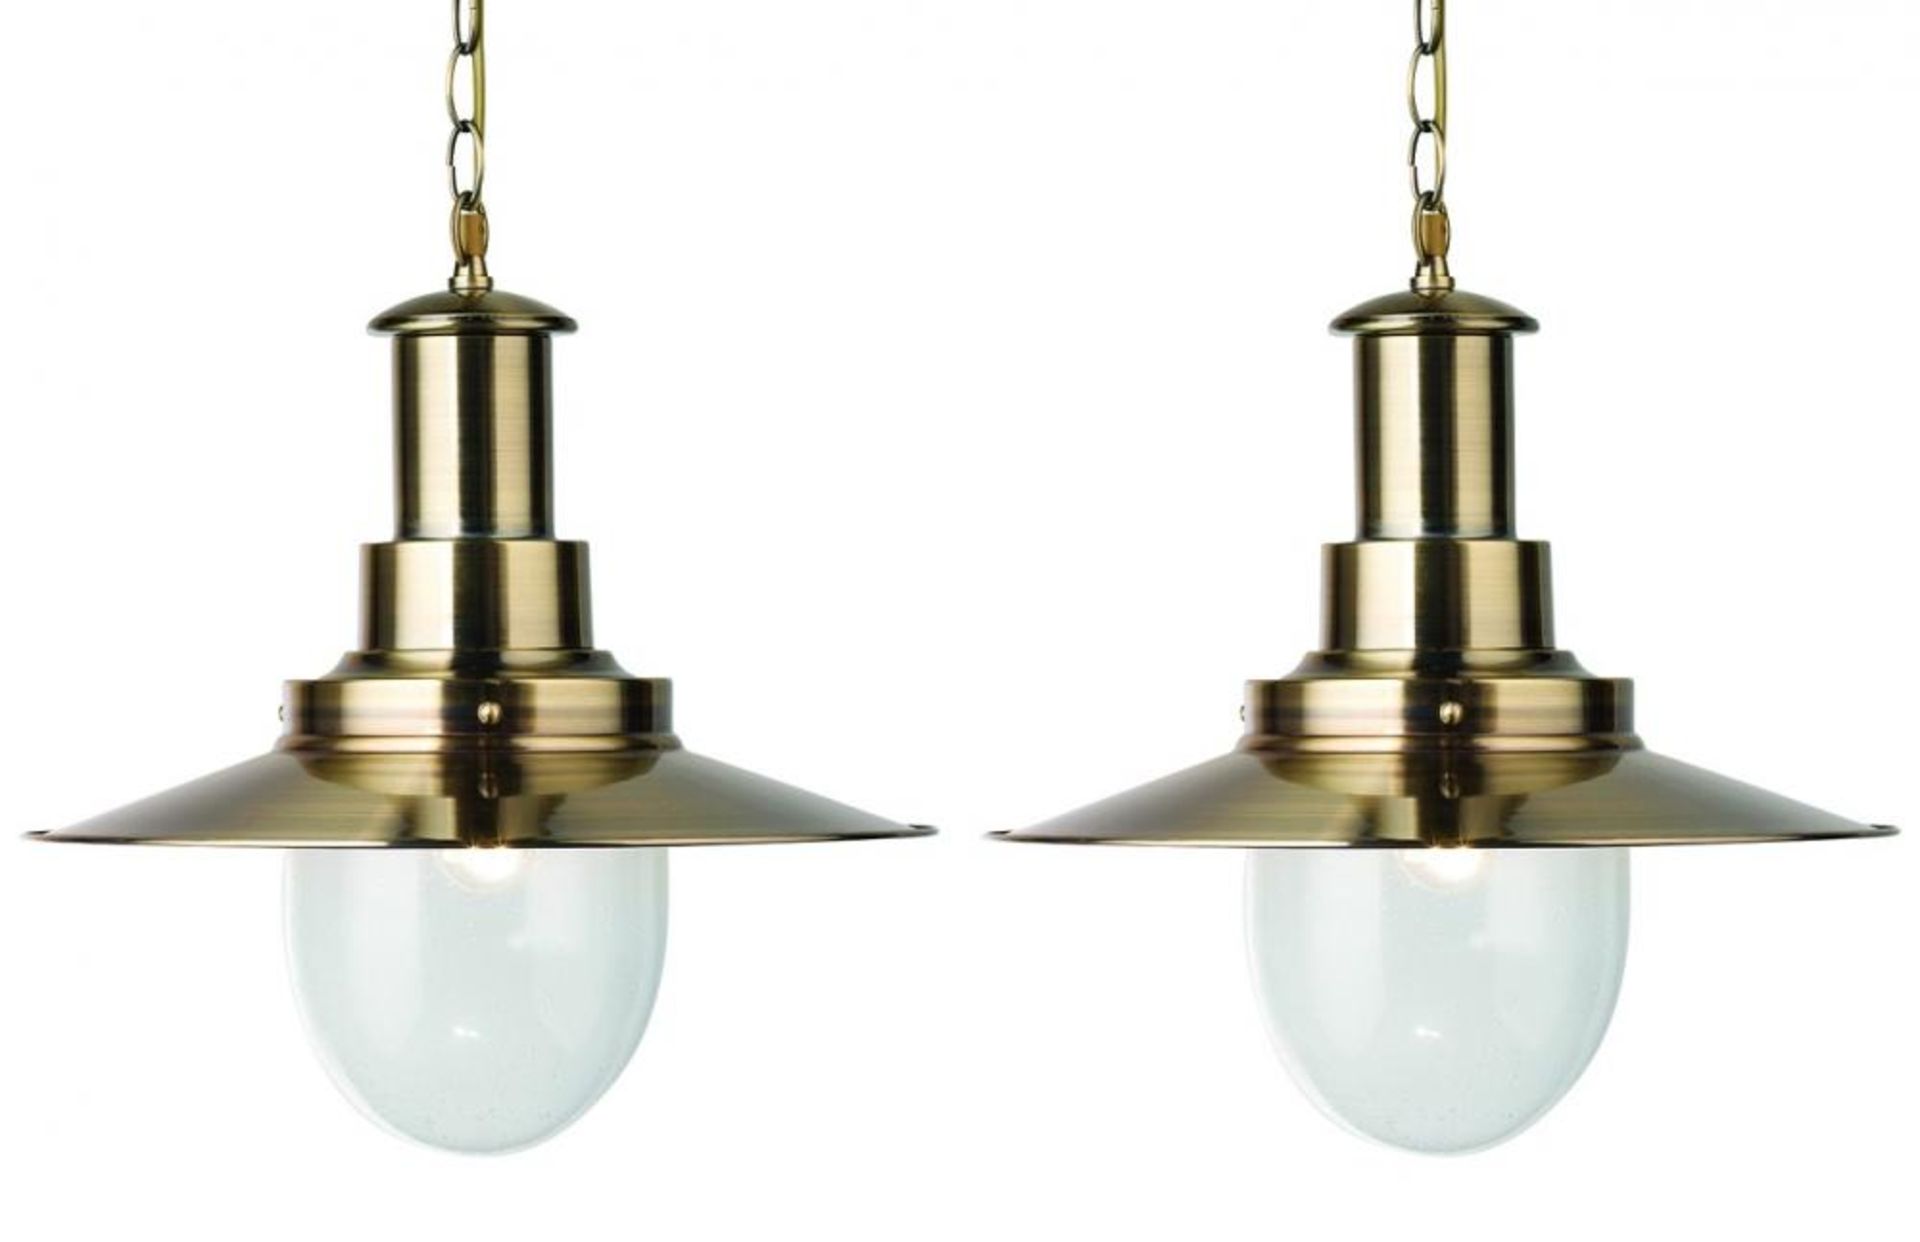 2 x Large Fisherman Antique Brass Pendant Lights With Oval Seeded Glass Shades - New Boxed Stock - C